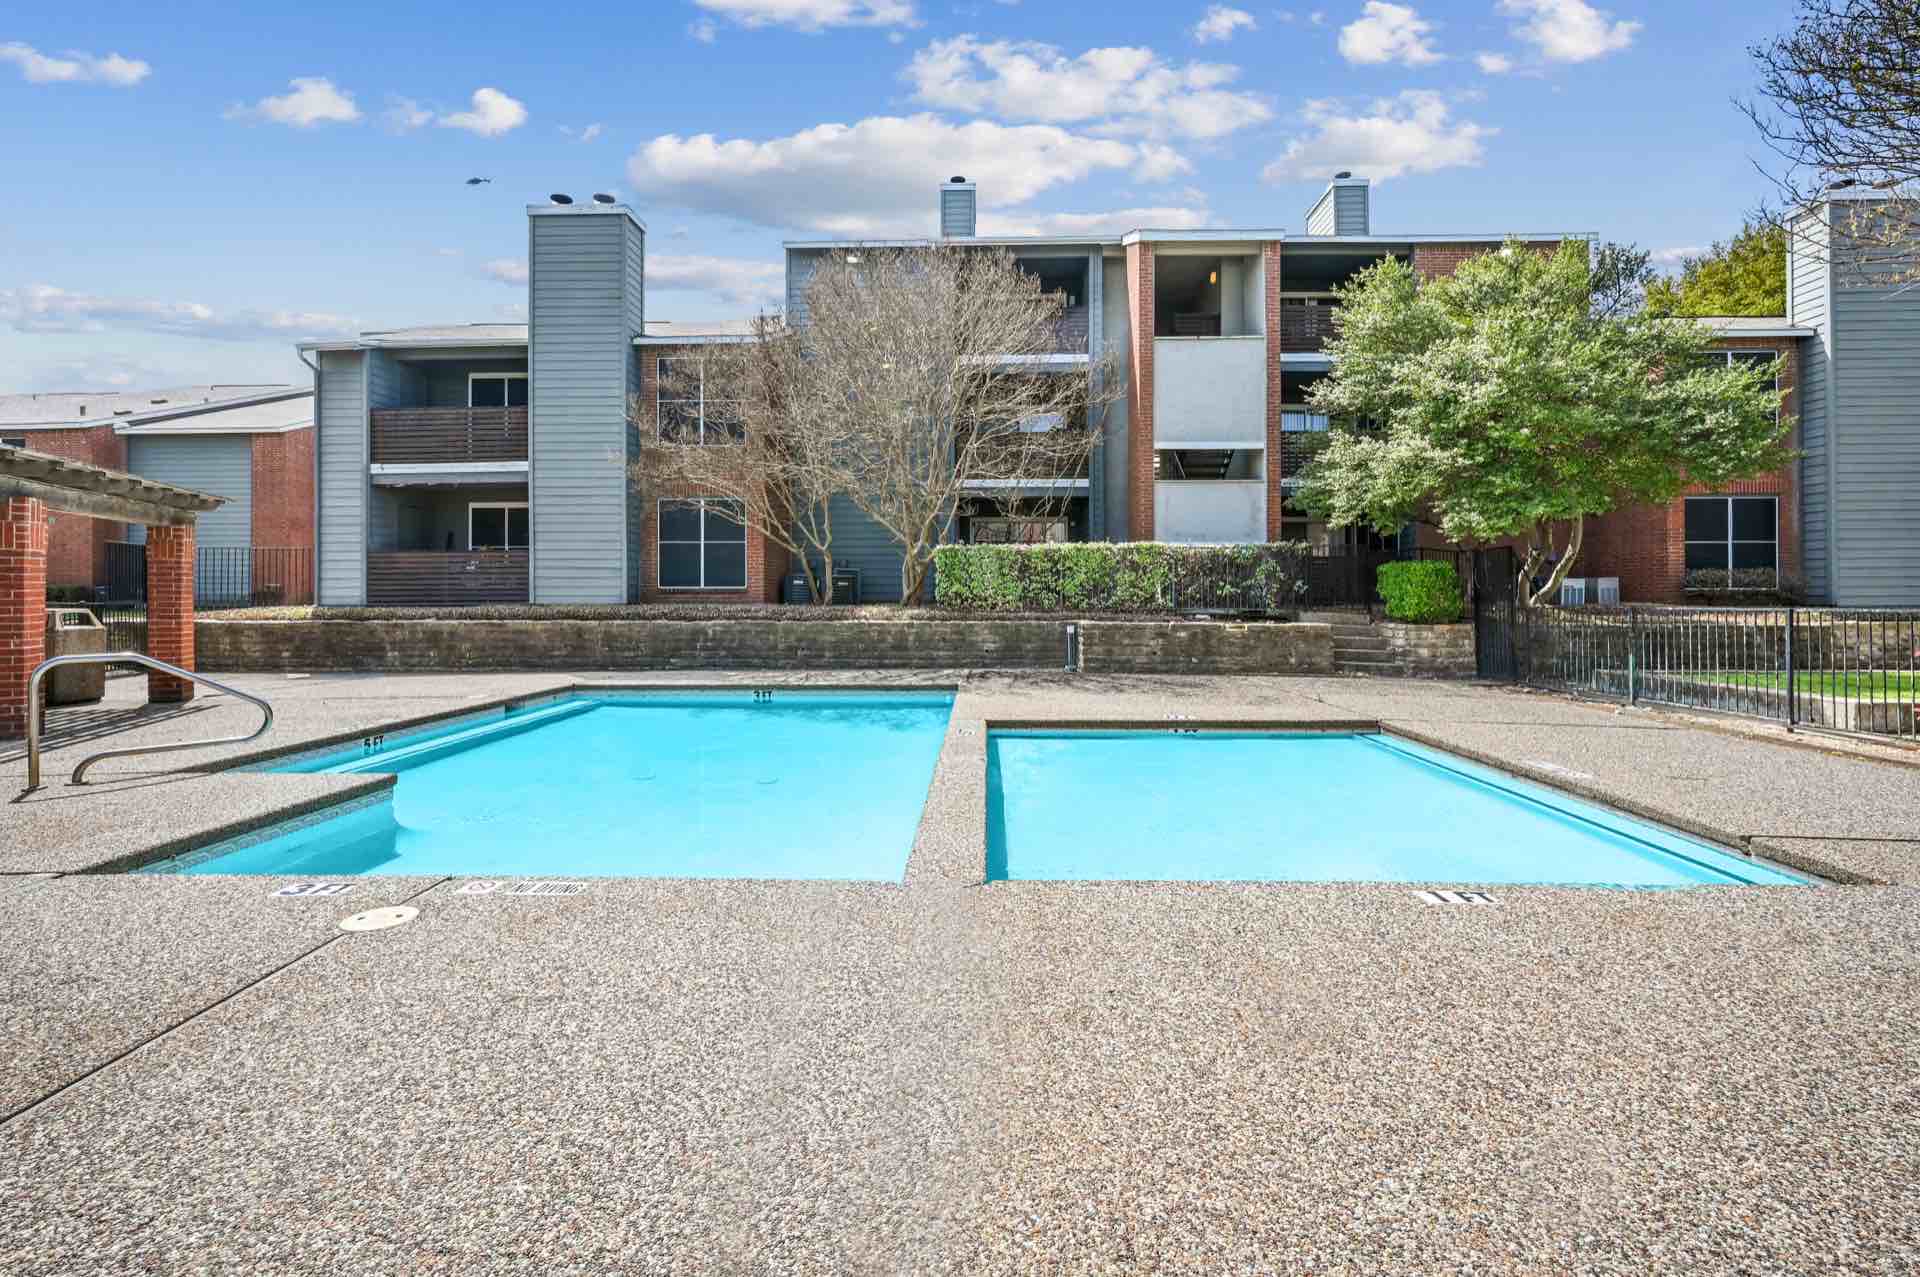 Two smaller pools by apartment buildings